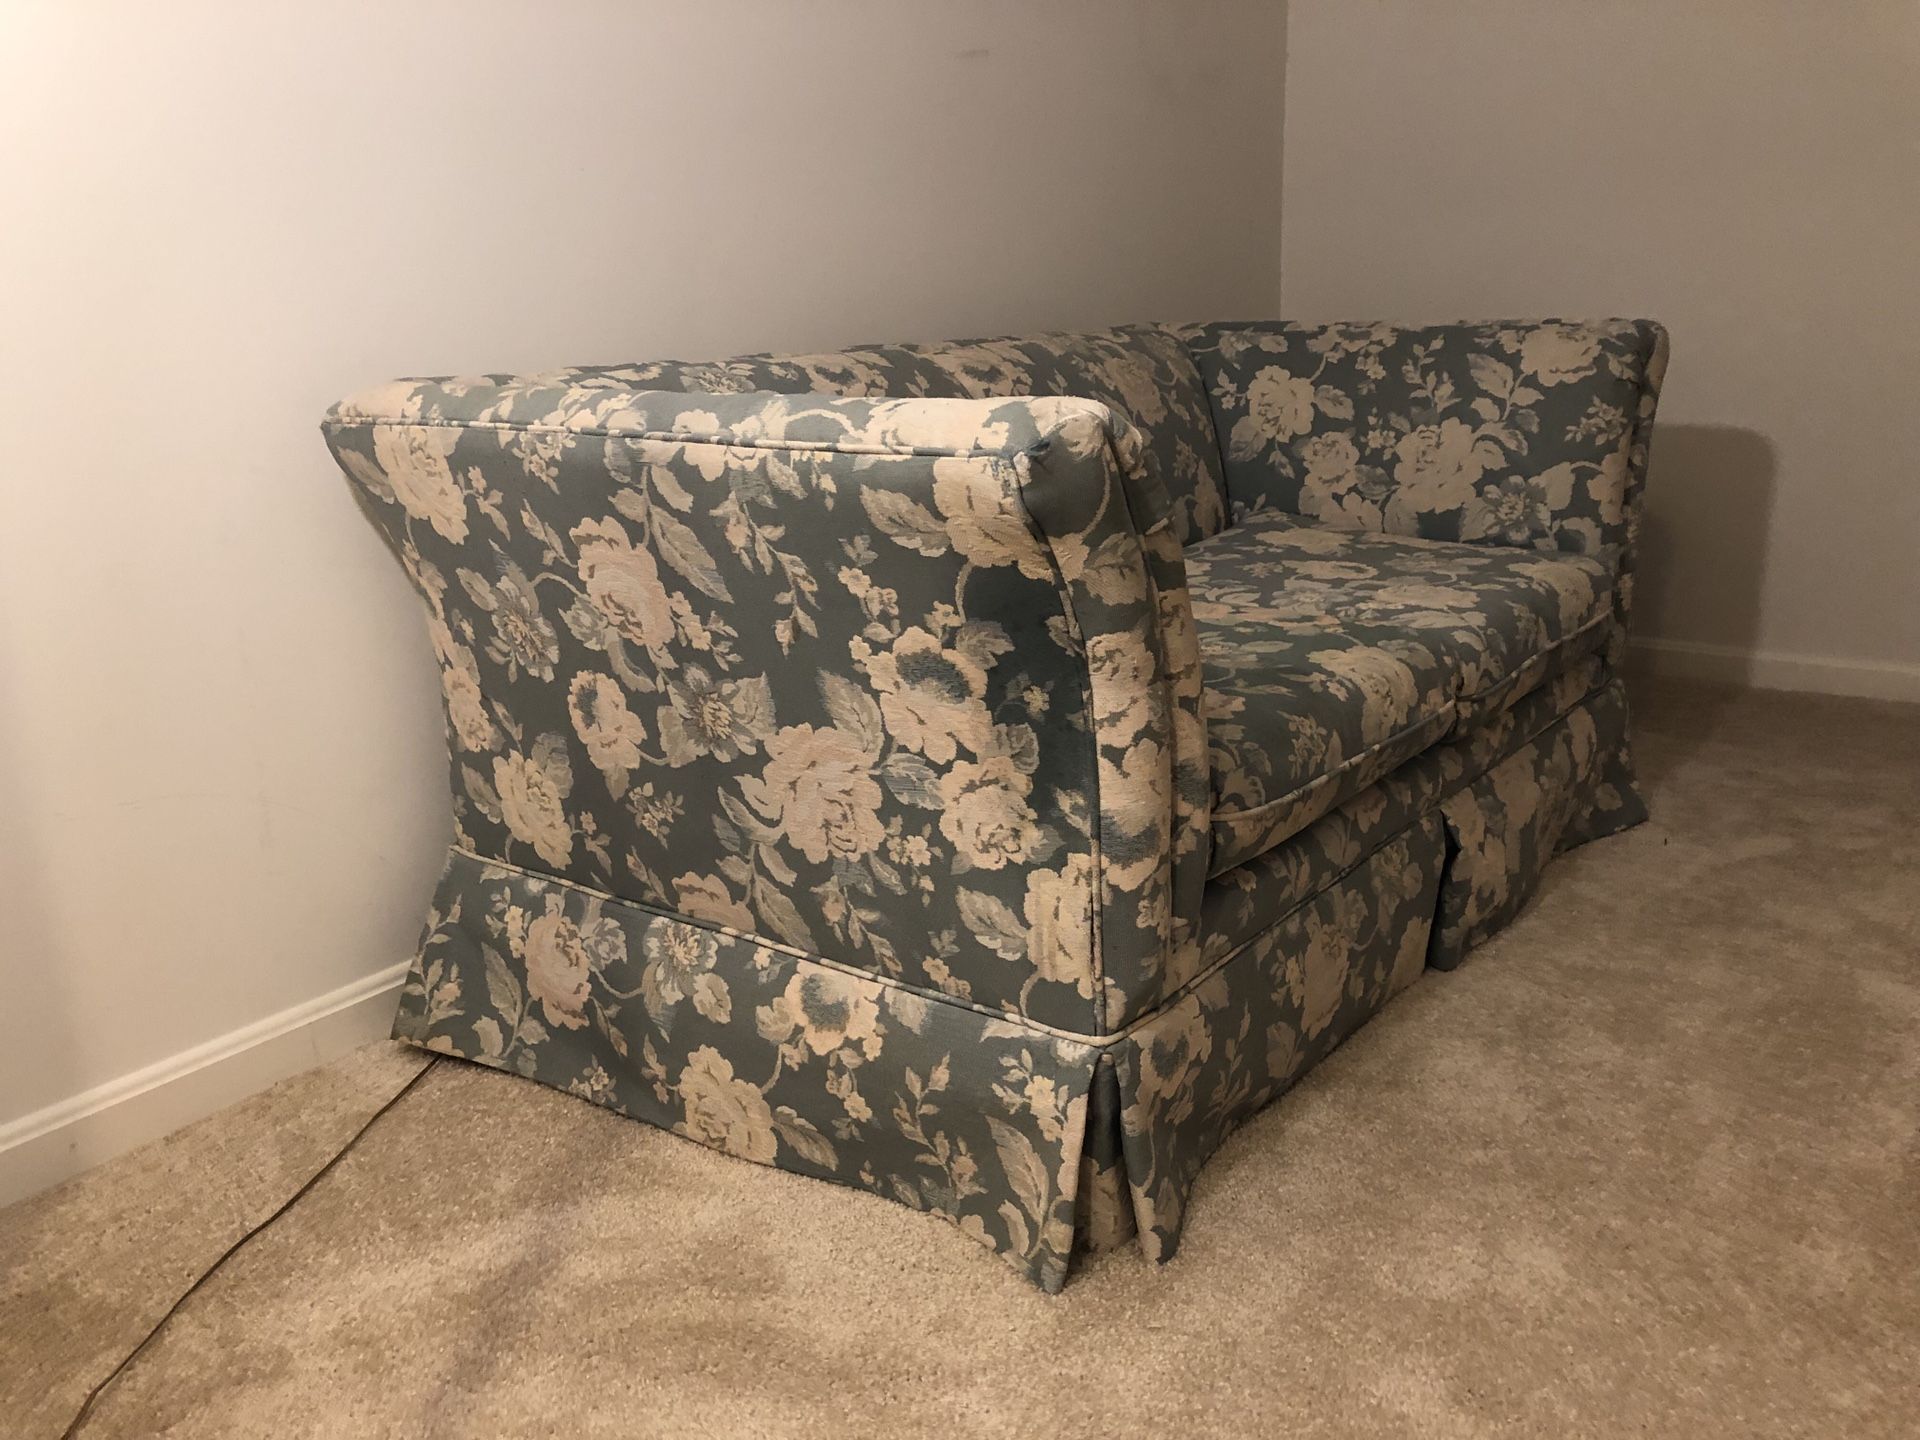 Lovely couch for free